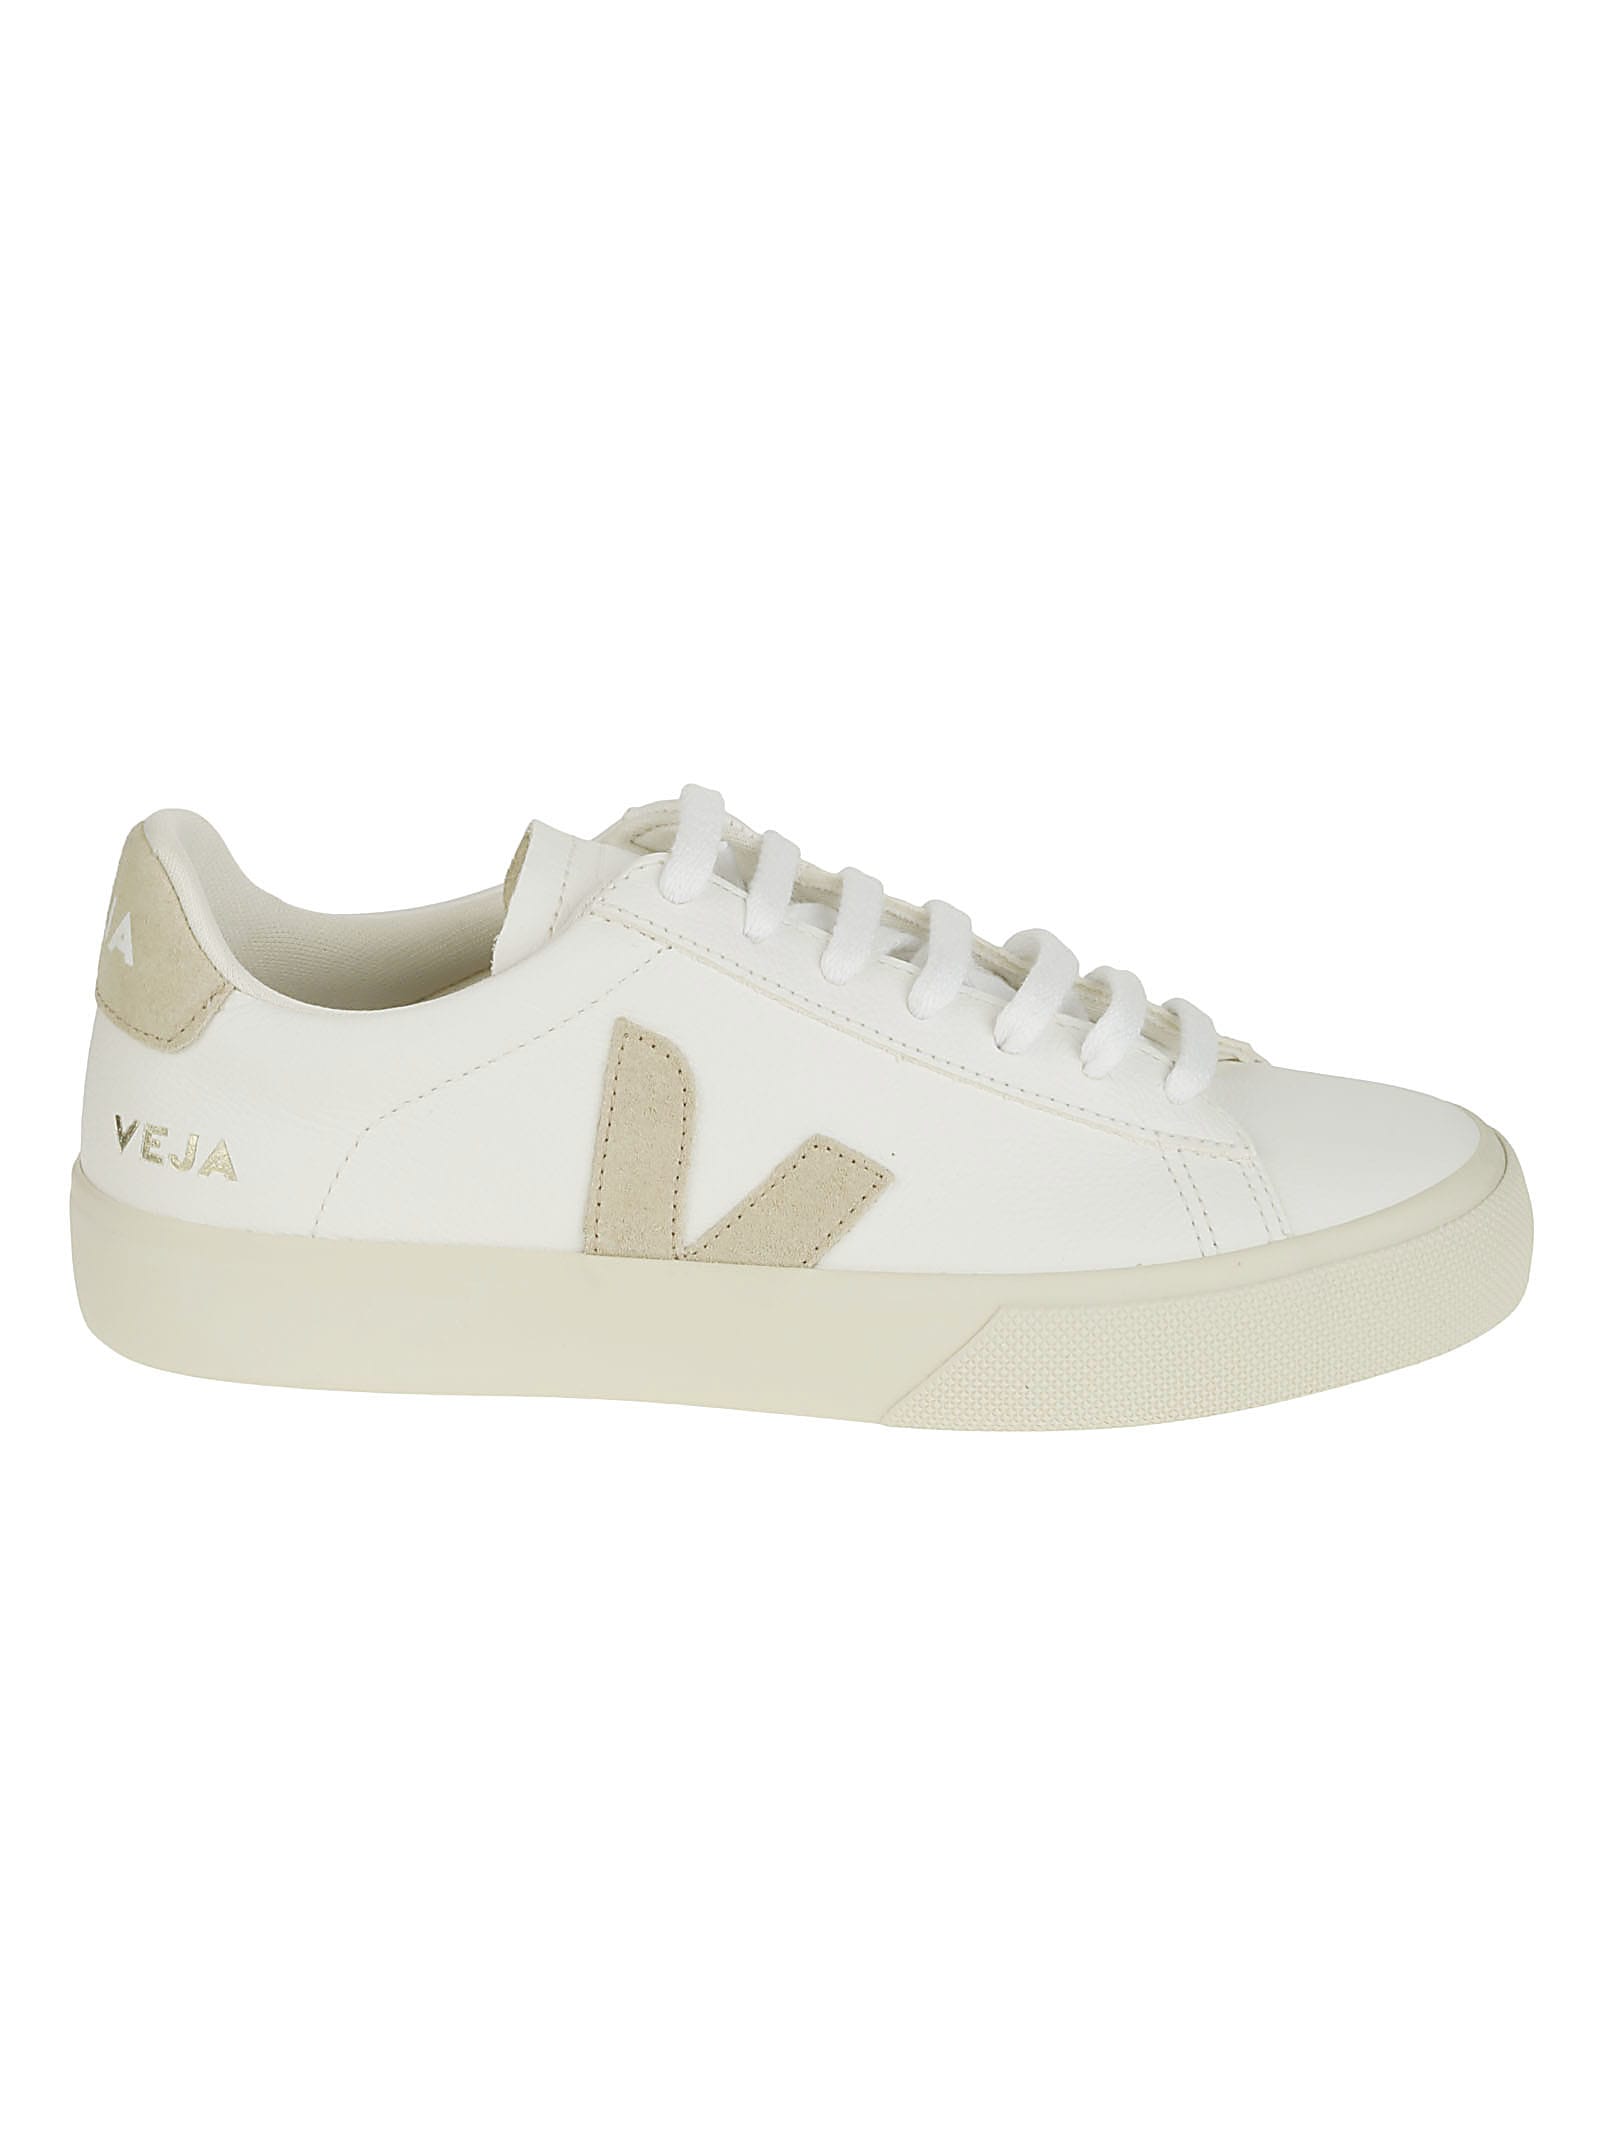 Veja Campo Chfree Leather In Extra White Almond | ModeSens